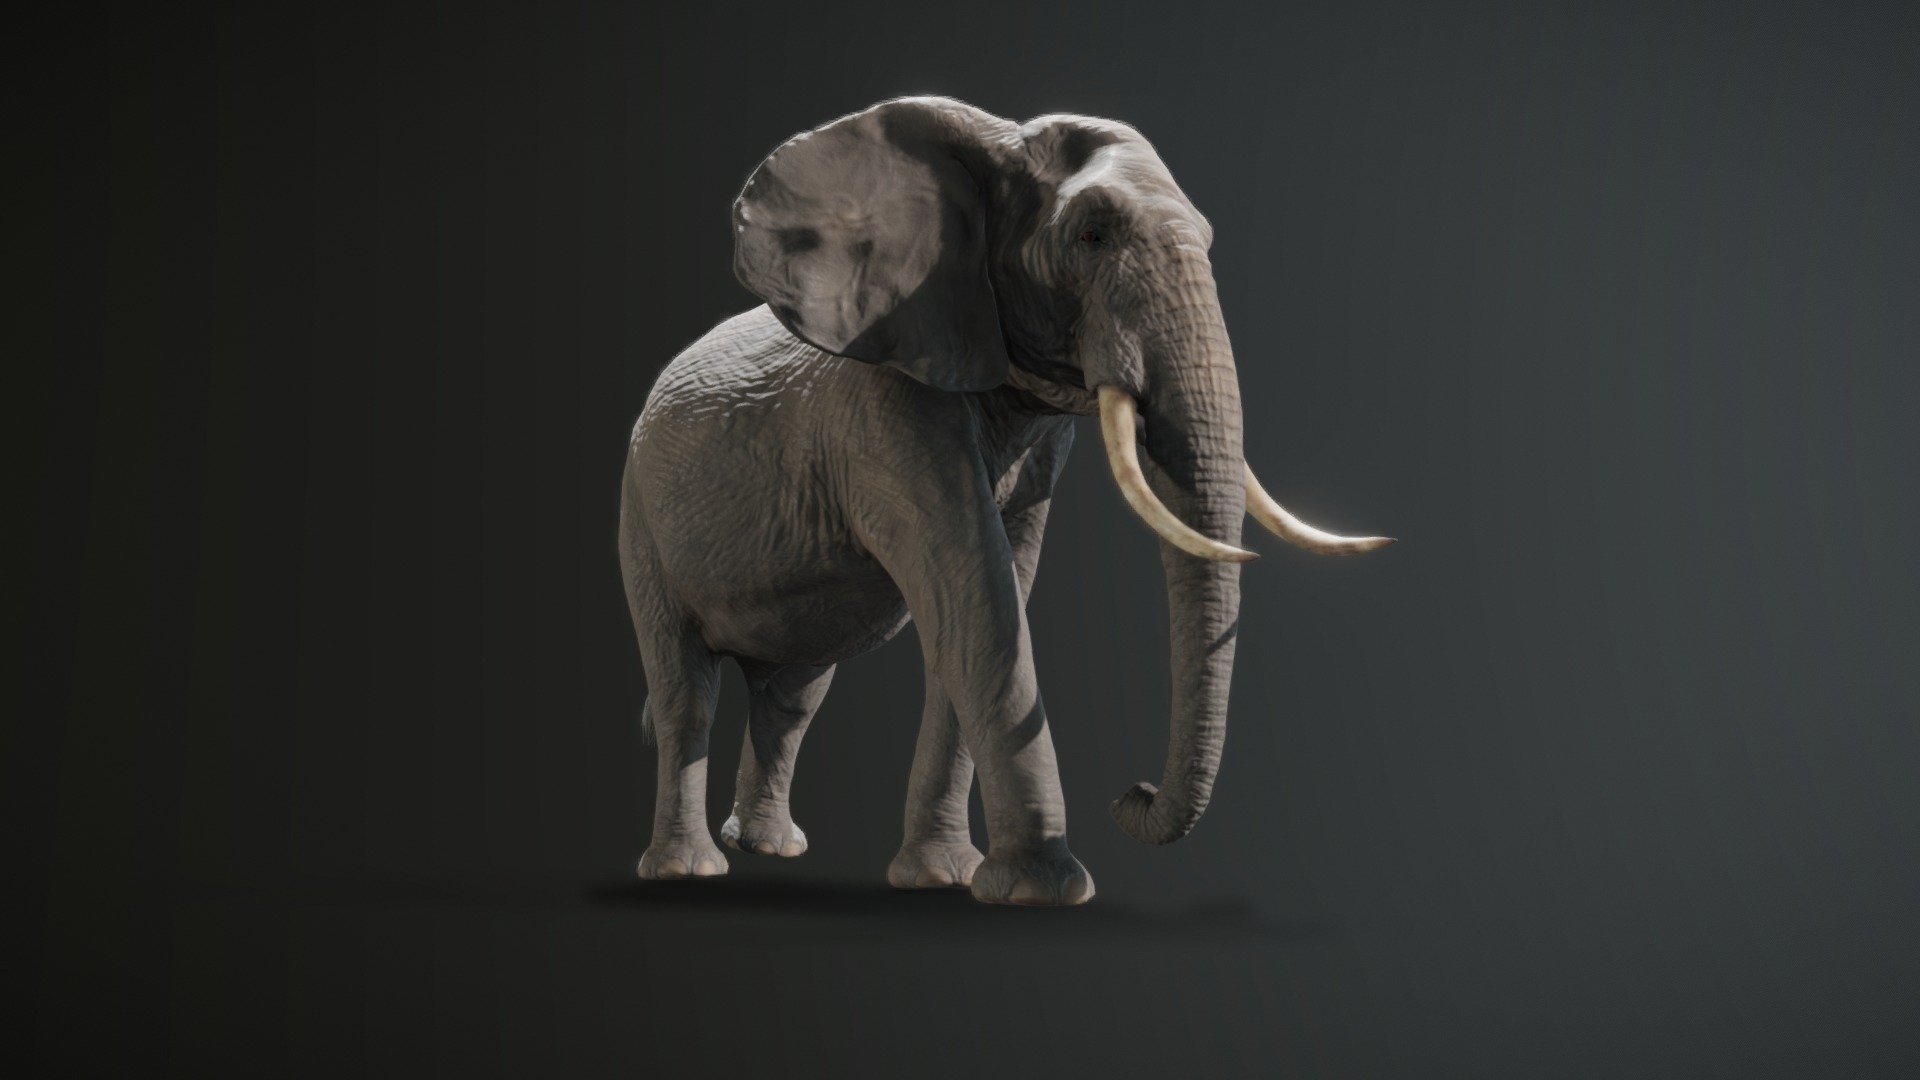 This article includes a faithful representation of a male African elephant.

Currently this object is available for Blender, adapted for Cycles, if you are looking for realism and EEVEE for fast renders

This product contains PBR textures, so it is easily exportable to multiple platforms, and offers efficient operation in environments with
limited resources such as video games, VR applications, augmented reality and real time.

-colormap 8192 x 8192
-glossinessmap 8192 x 8192
-normalmap 8192 x 8192
-normalmap_lowpoly 8192 x 8192
-displacementmap 8192 x 8192
-eye_textures
-hair_textures

Apart from the PBR textures you can find a high quality displacement map (16 bit deep) so that you can extract this object in any resolution, although this option is only recommended for expert users. For that reason three resolutions are included in this pack
preset:

You will have access to updates after the purchase is made for free.

don't forget to upload the textures to the materials 3d model